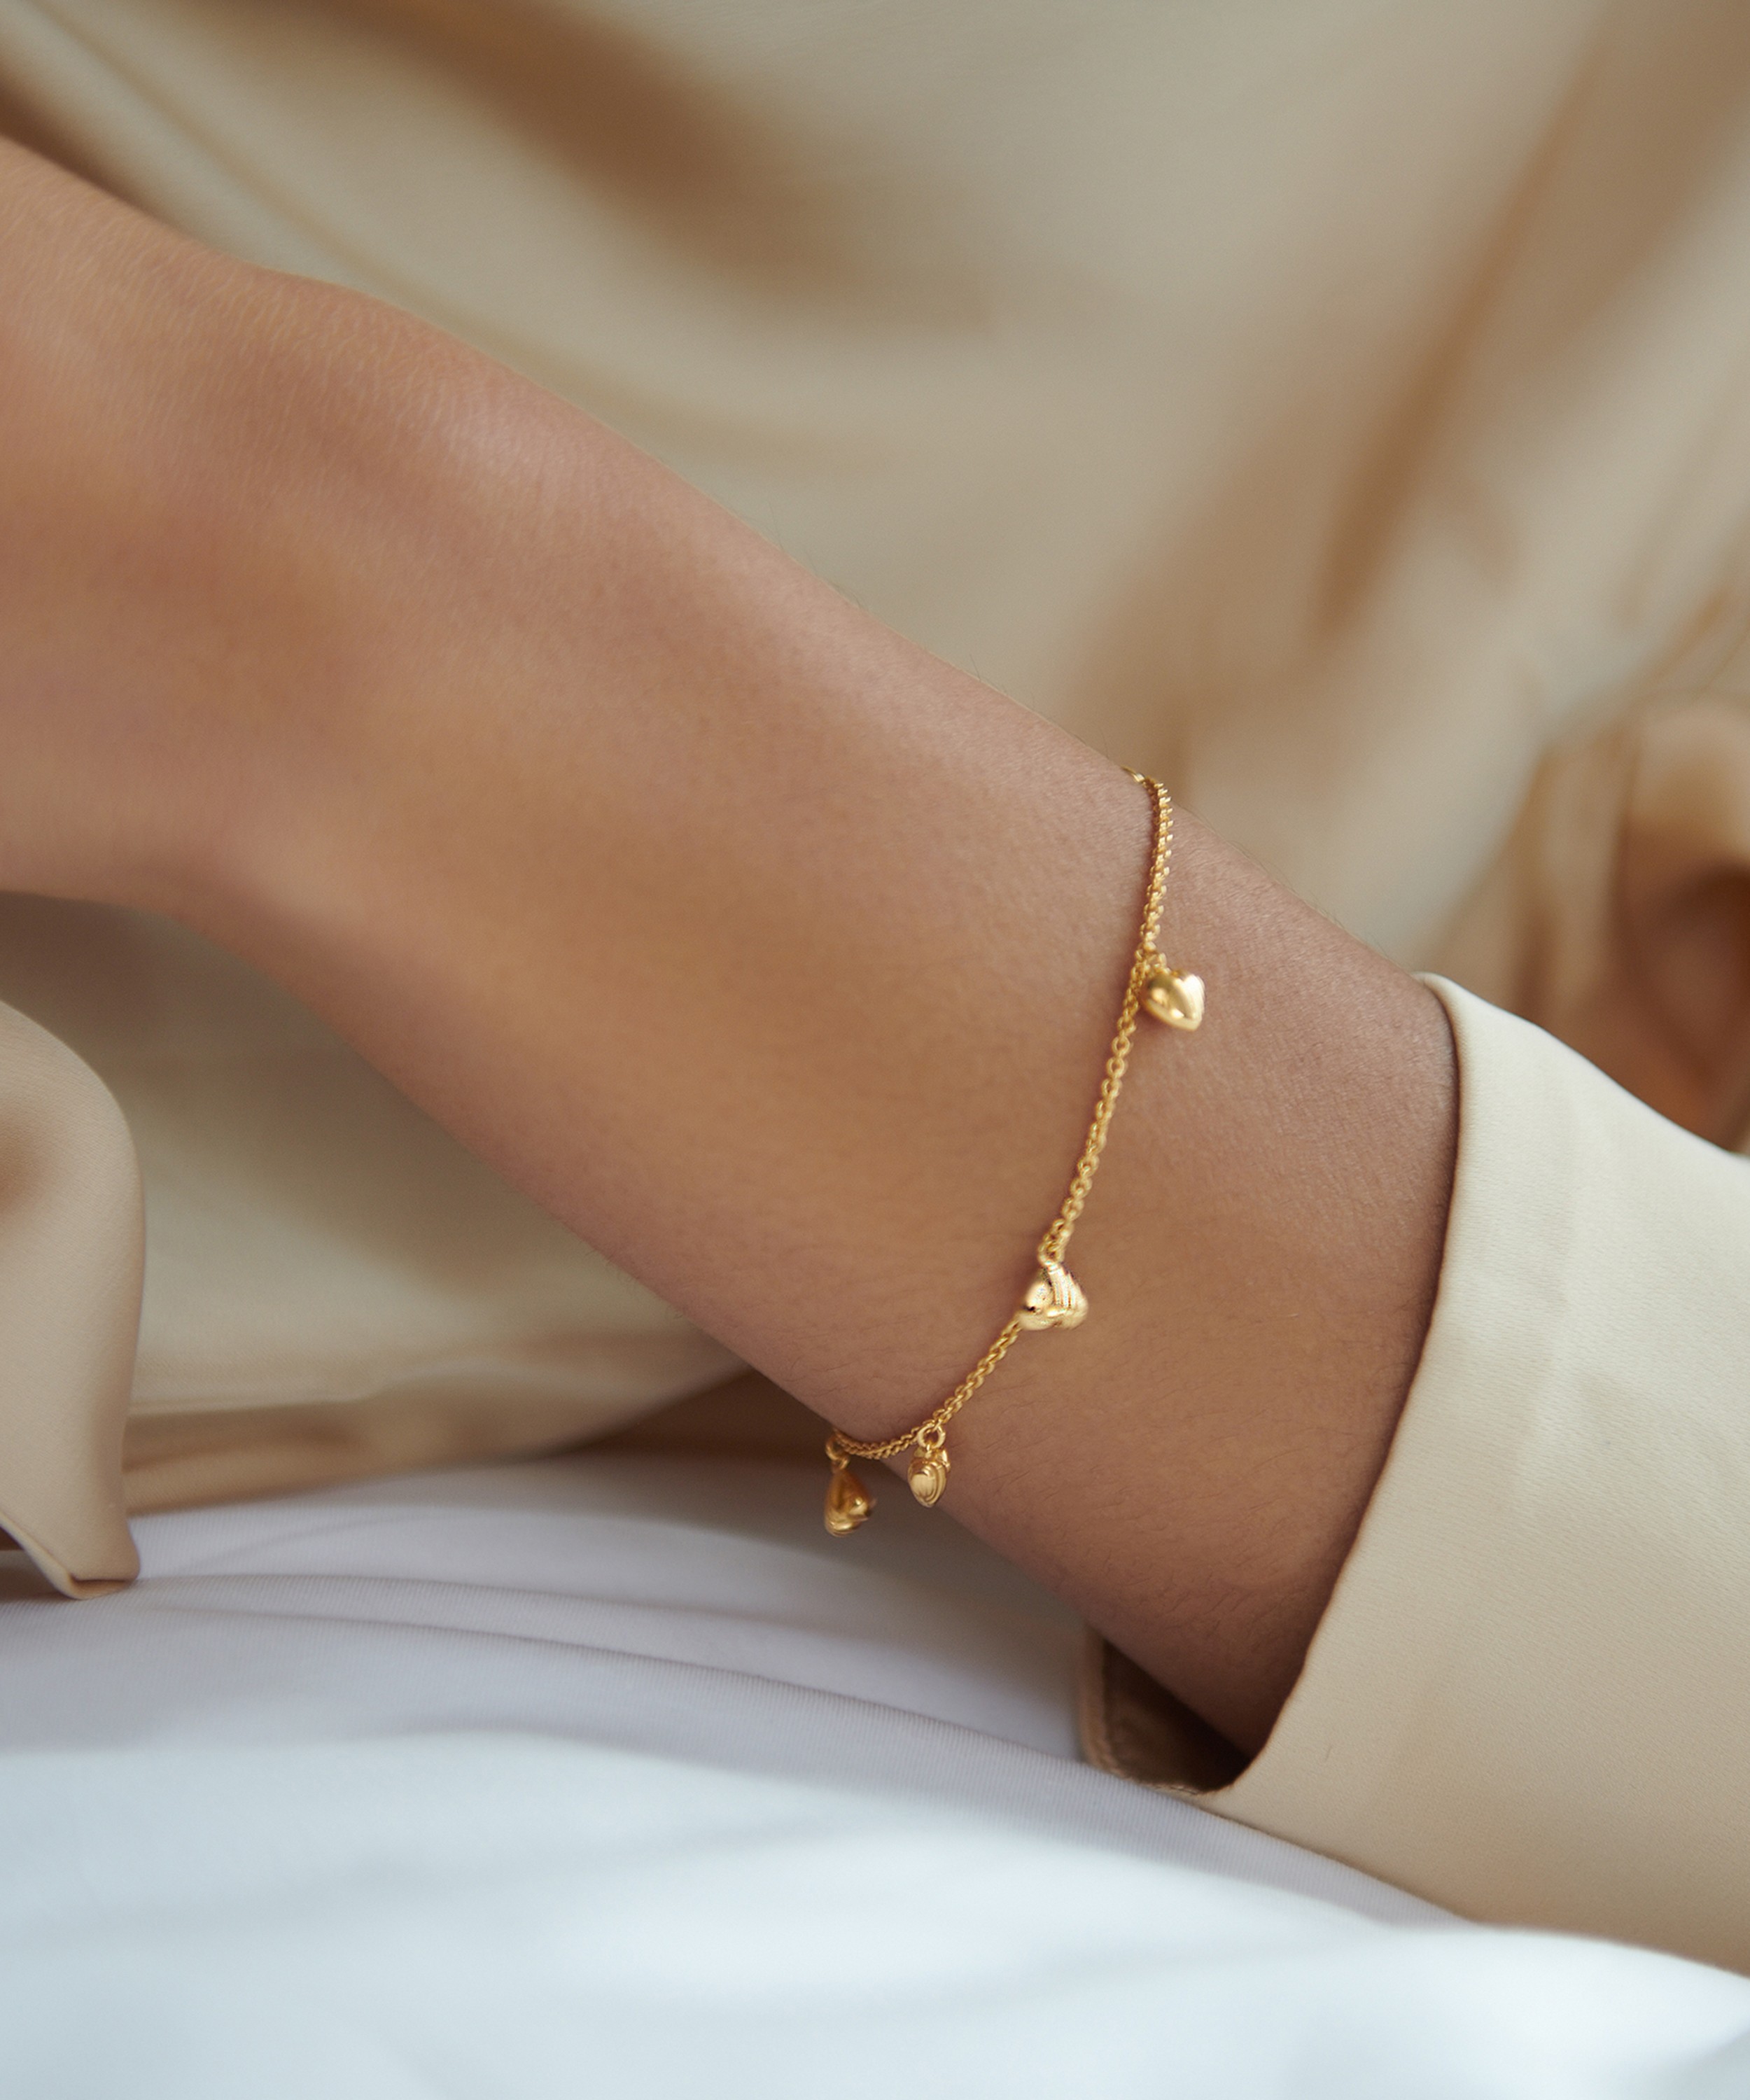 22ct Gold Two Layer Bracelet for Ladies at